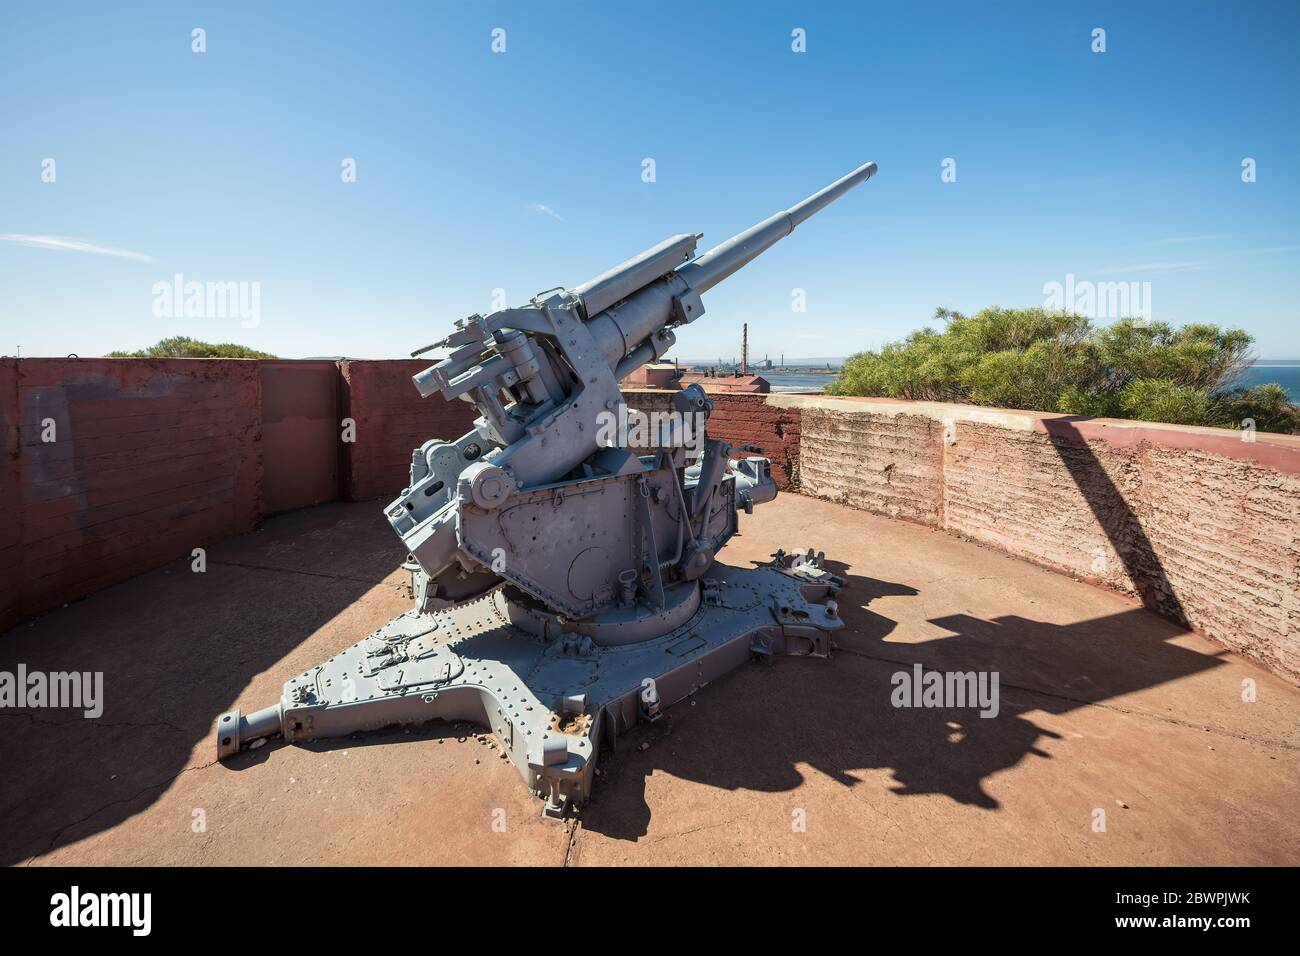 Whyalla South Australia November 17th 2019 : Side view of the world war II era 3.7 inch anti aircraft gun mounted on Hummock Hill in Whyalla Stock Photo